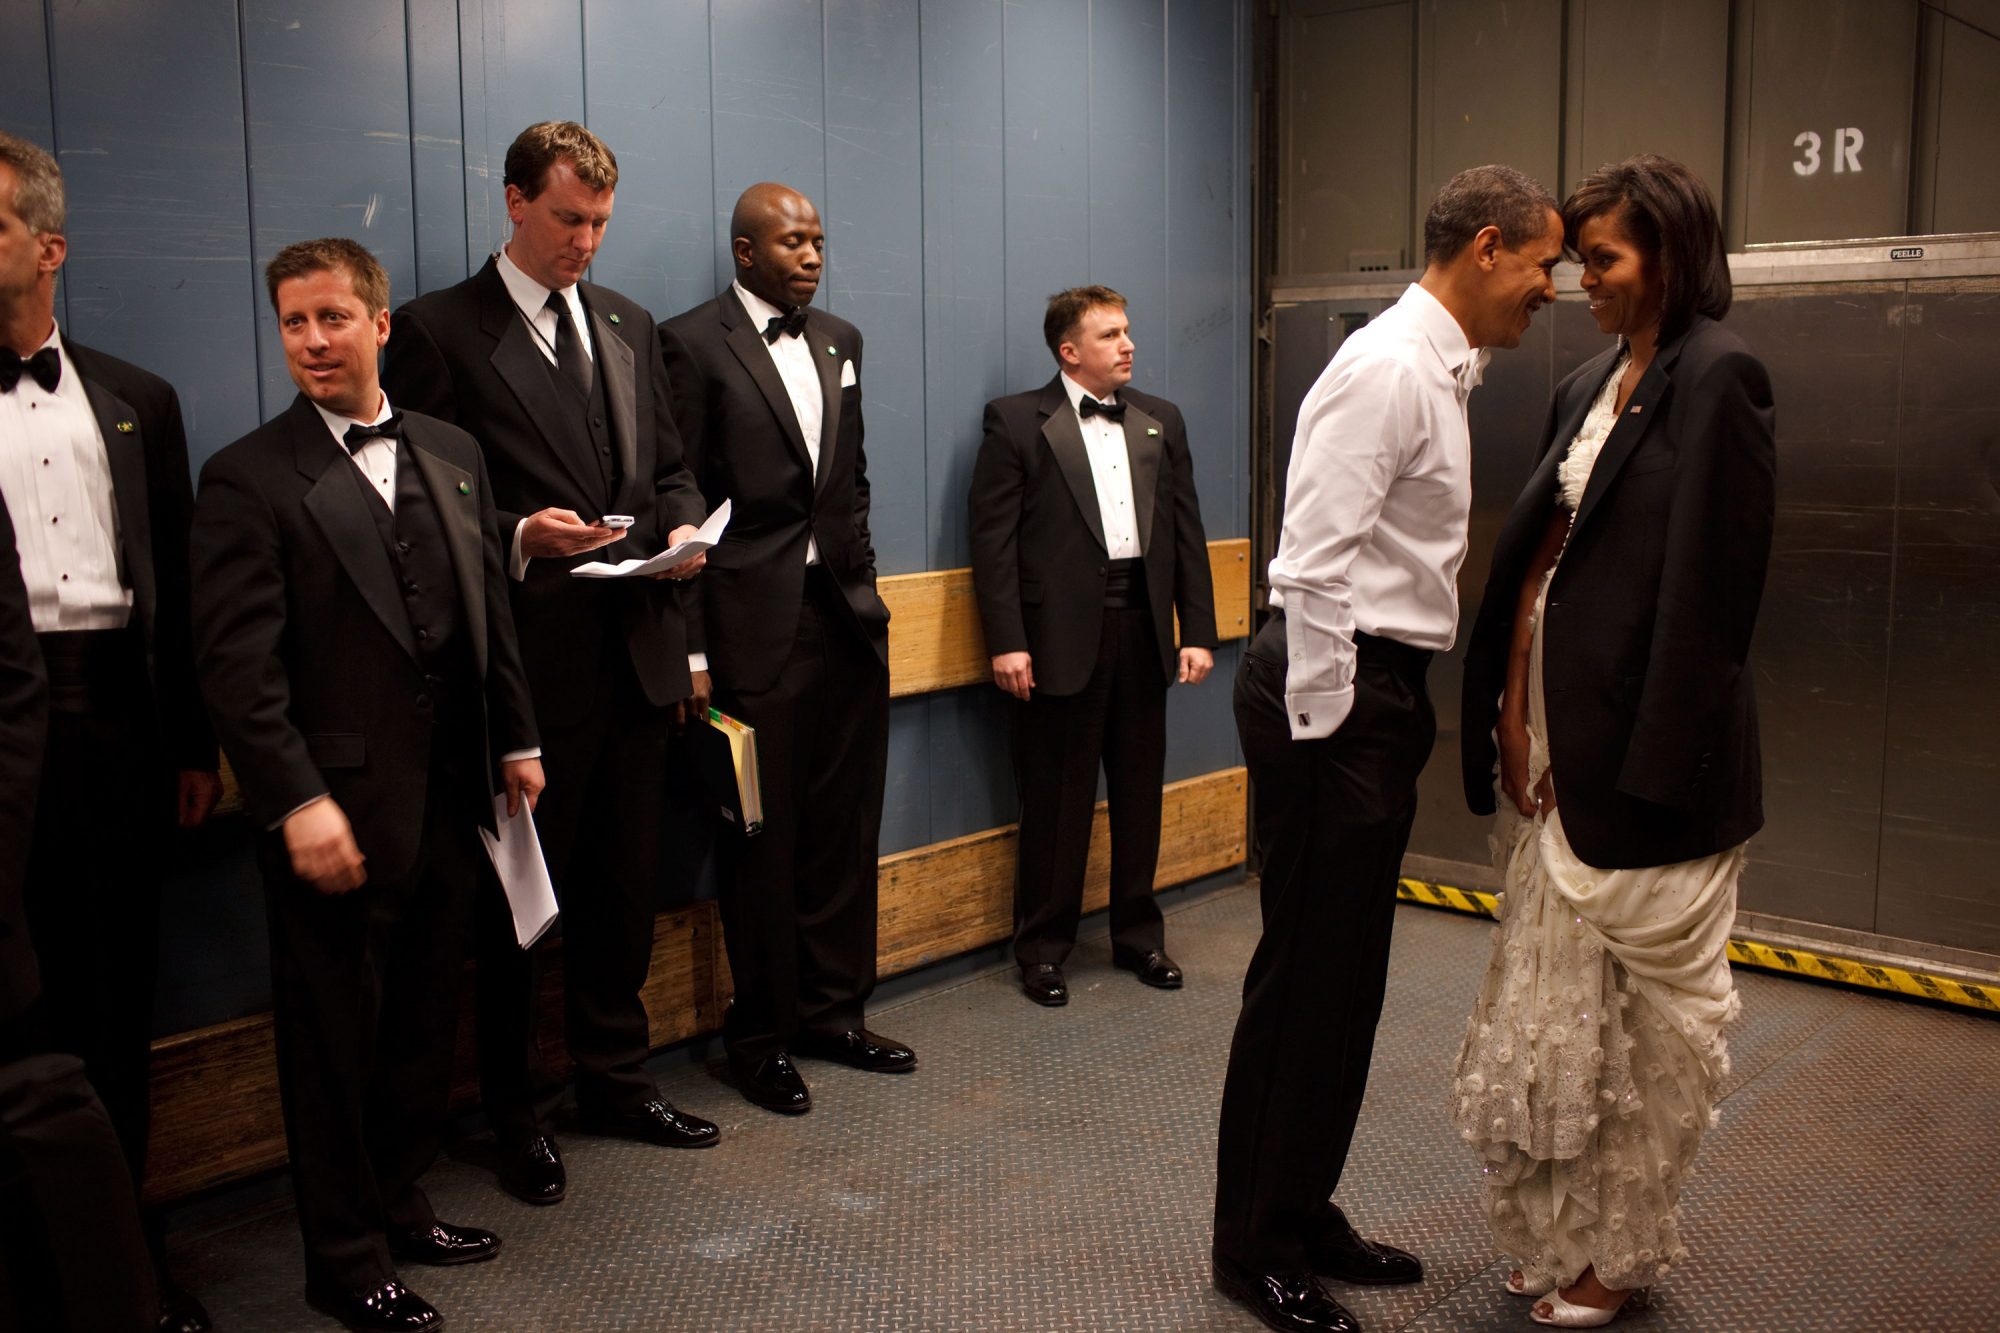 WASHINGTON - JANUARY 20:  In this handout from the White House, U.S. President Barack Obama and first lady Michelle Obama together in a freight elevator at an Inaugural Ball, January 20, 2009 in Washington, DC.  (Photo by Pete Souza/White House via Getty Images)